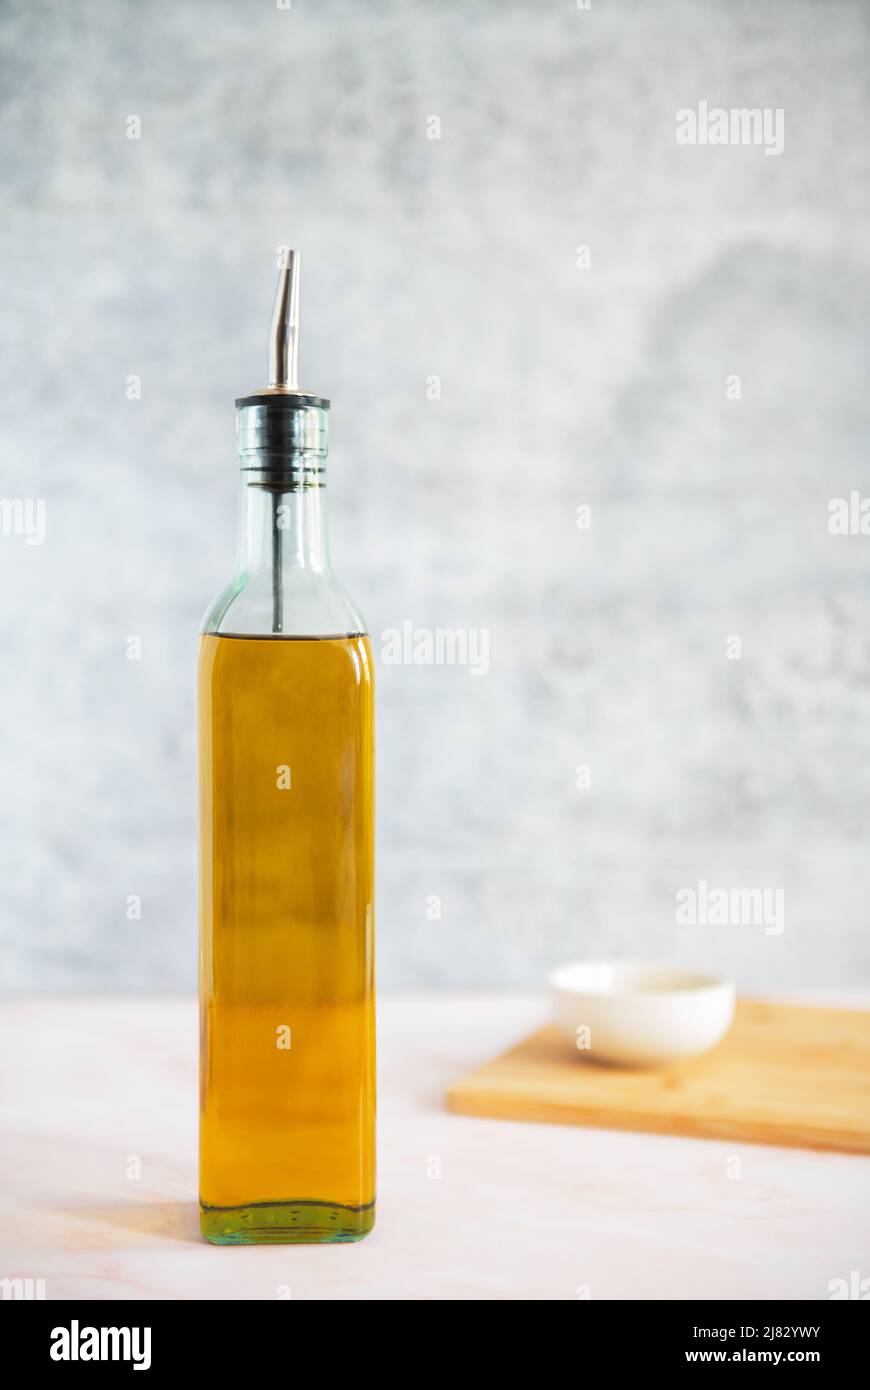 Decanter of olive oil in a kitchen setting Stock Photo